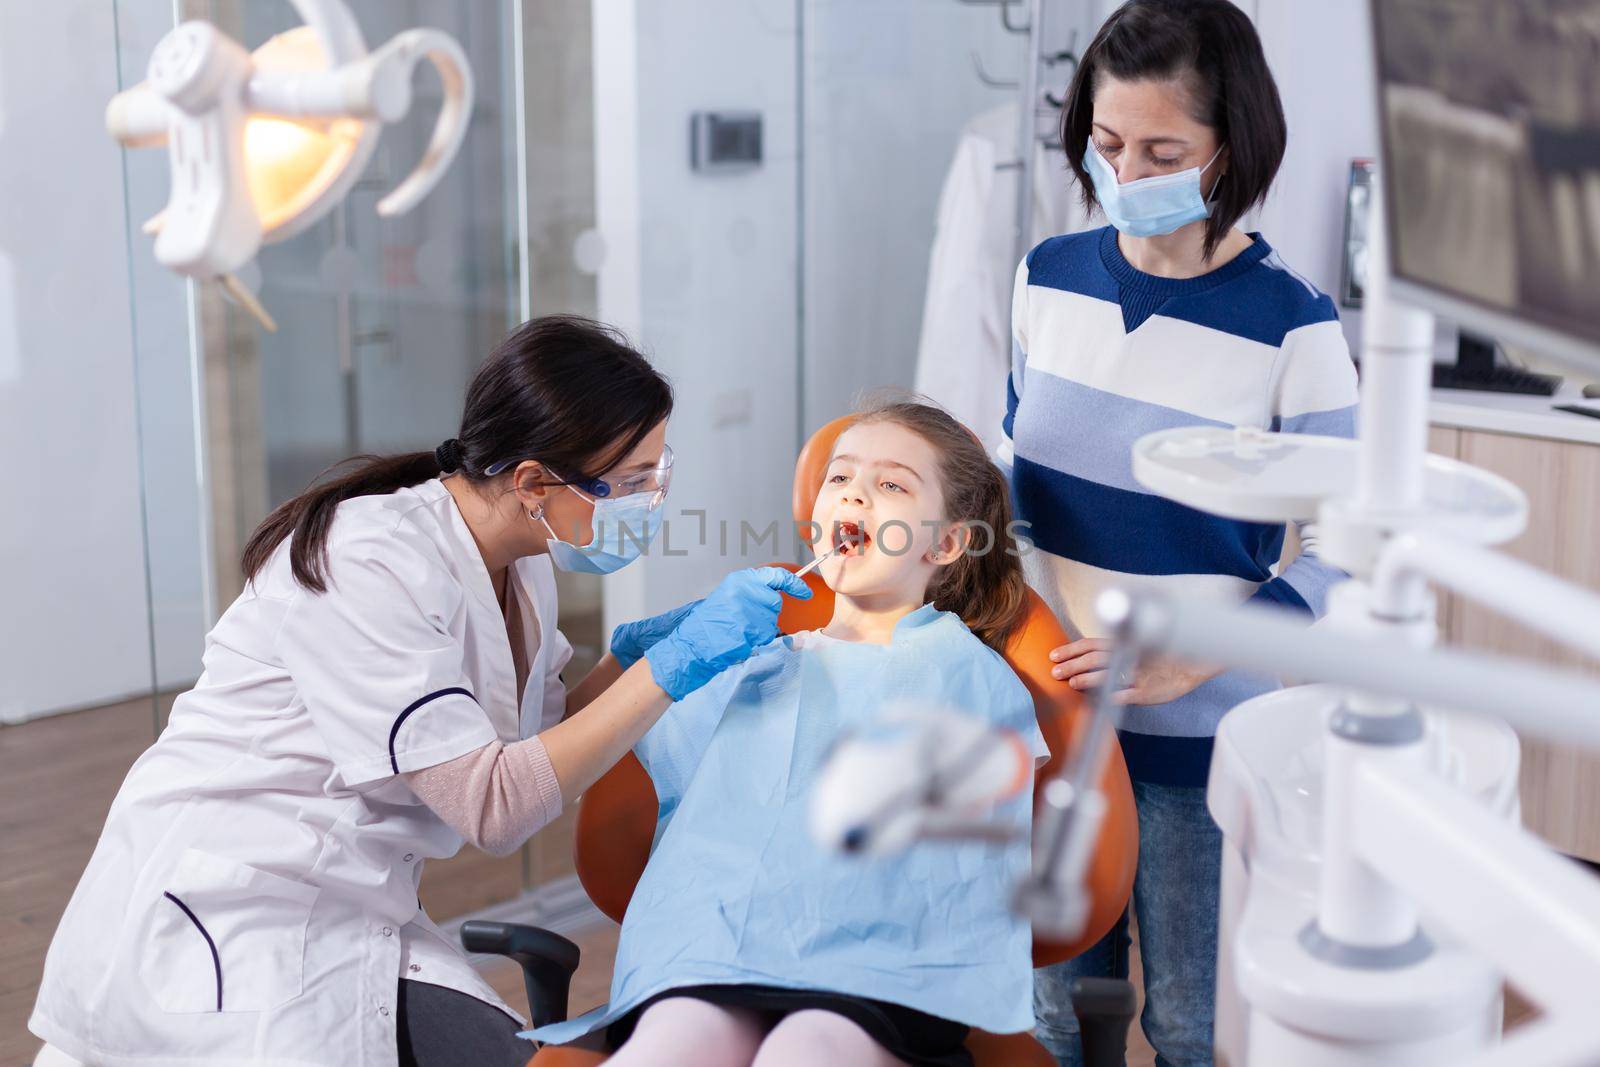 Dentist using mirror in the course of kid mouth examination sitting on dental chair. Dentistry specialist during child cavity consultation in stomatology office using modern technology.